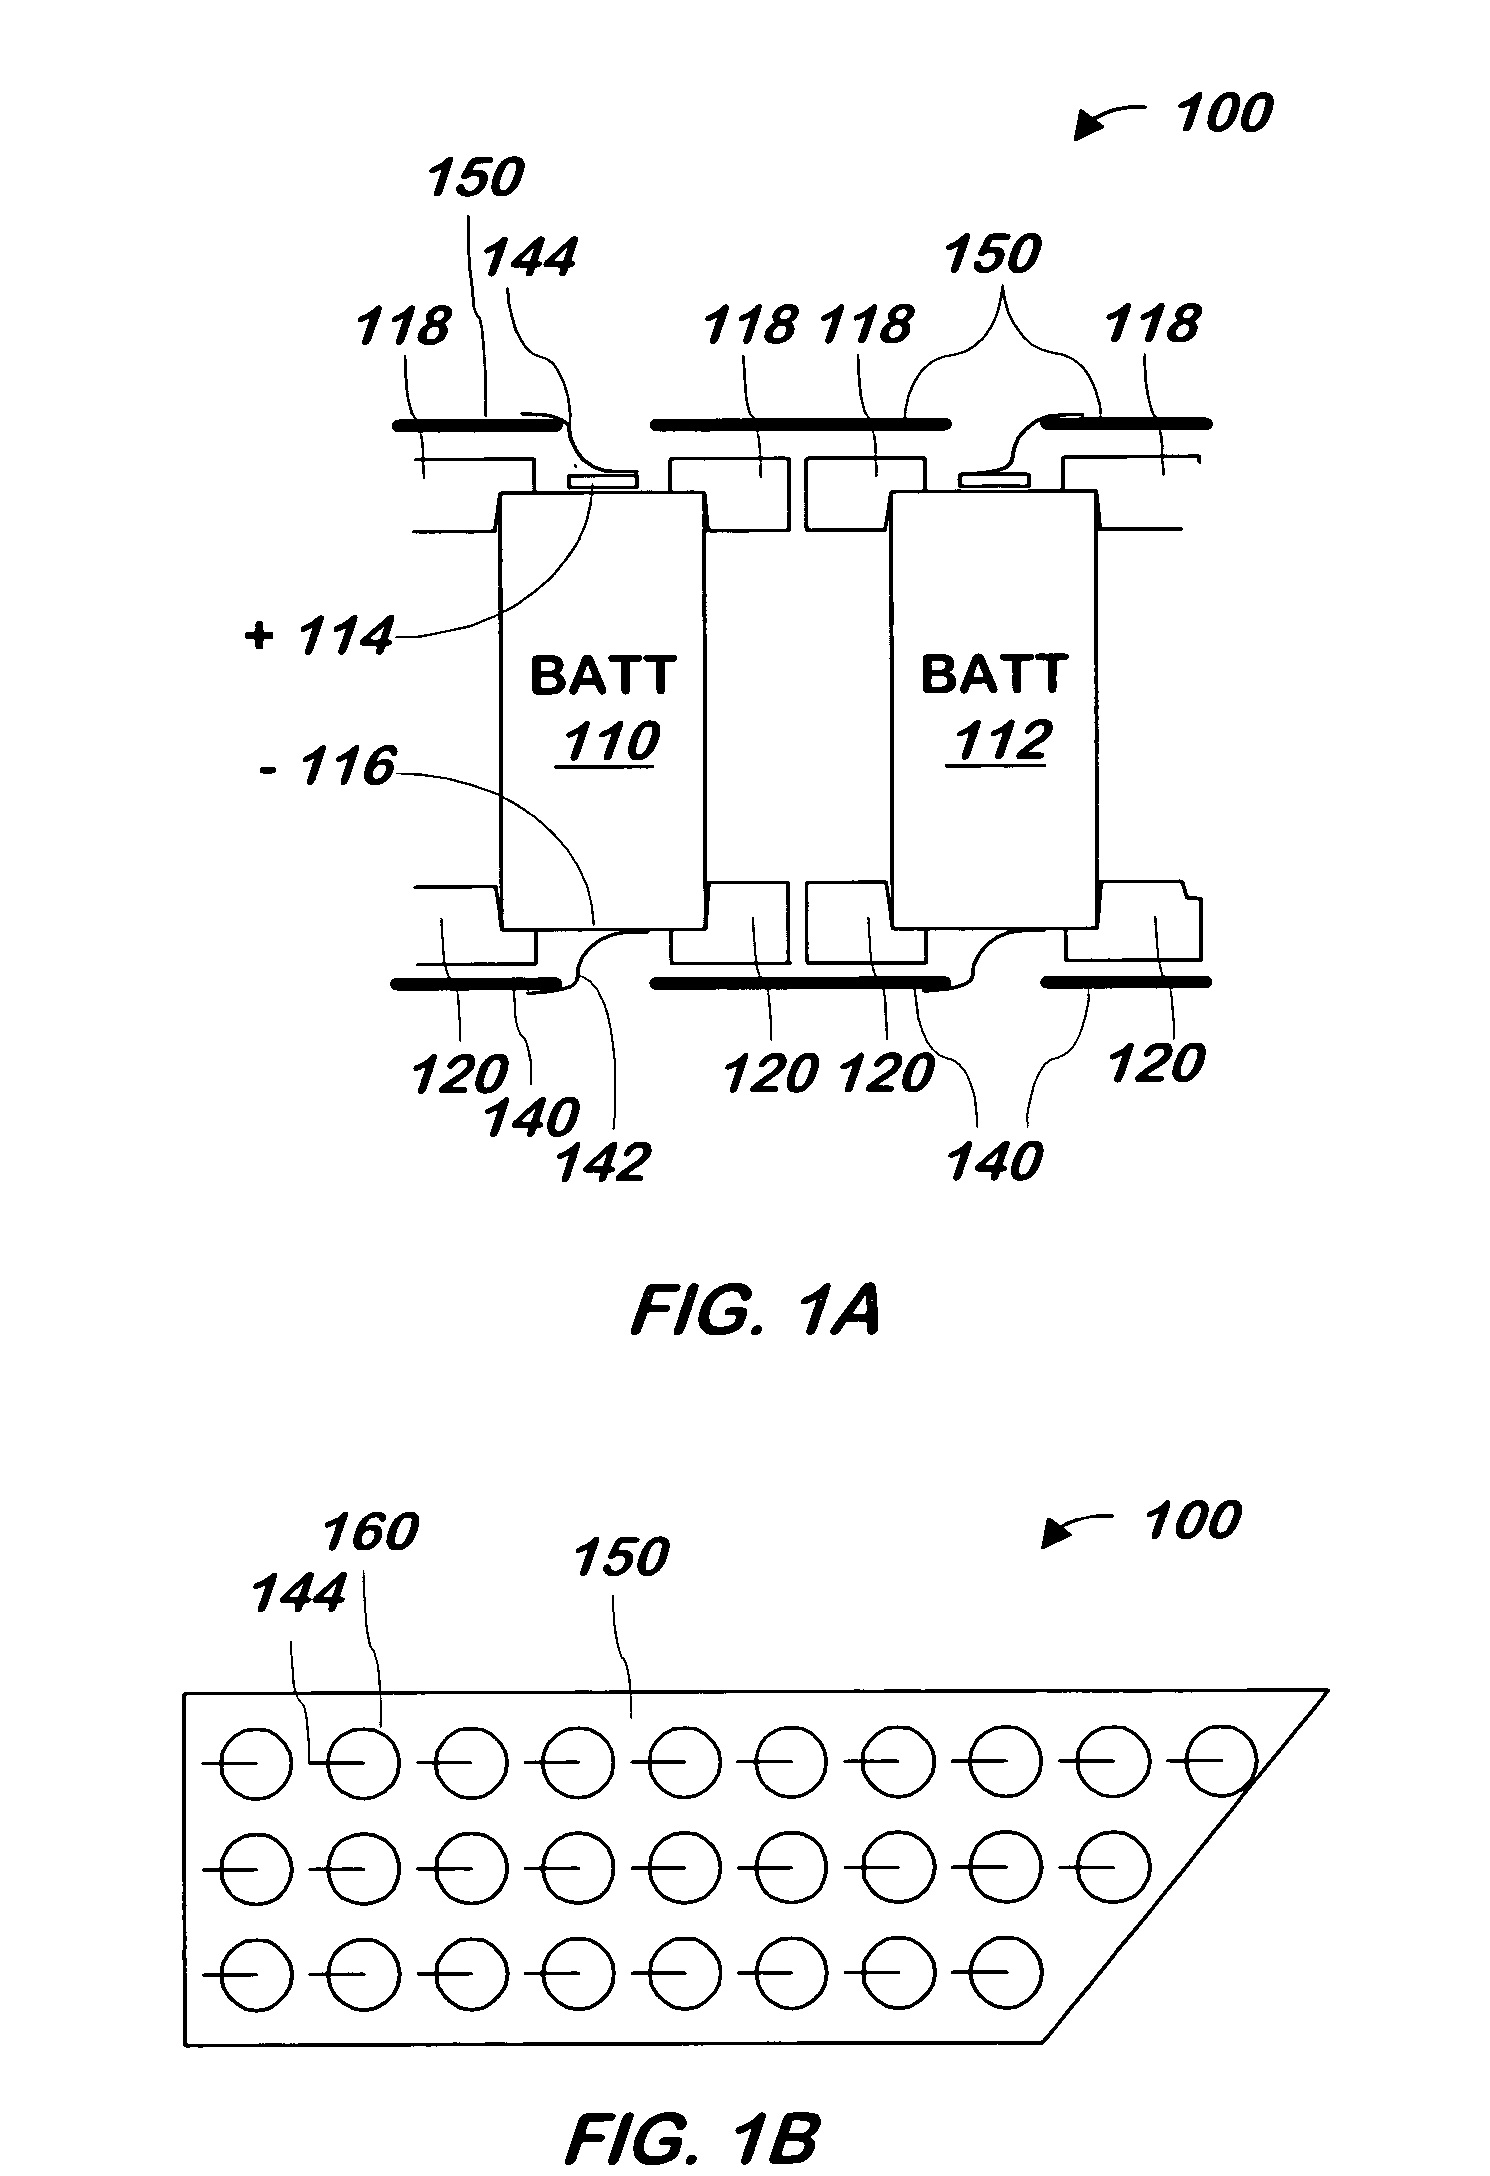 System and method for fusibly linking batteries